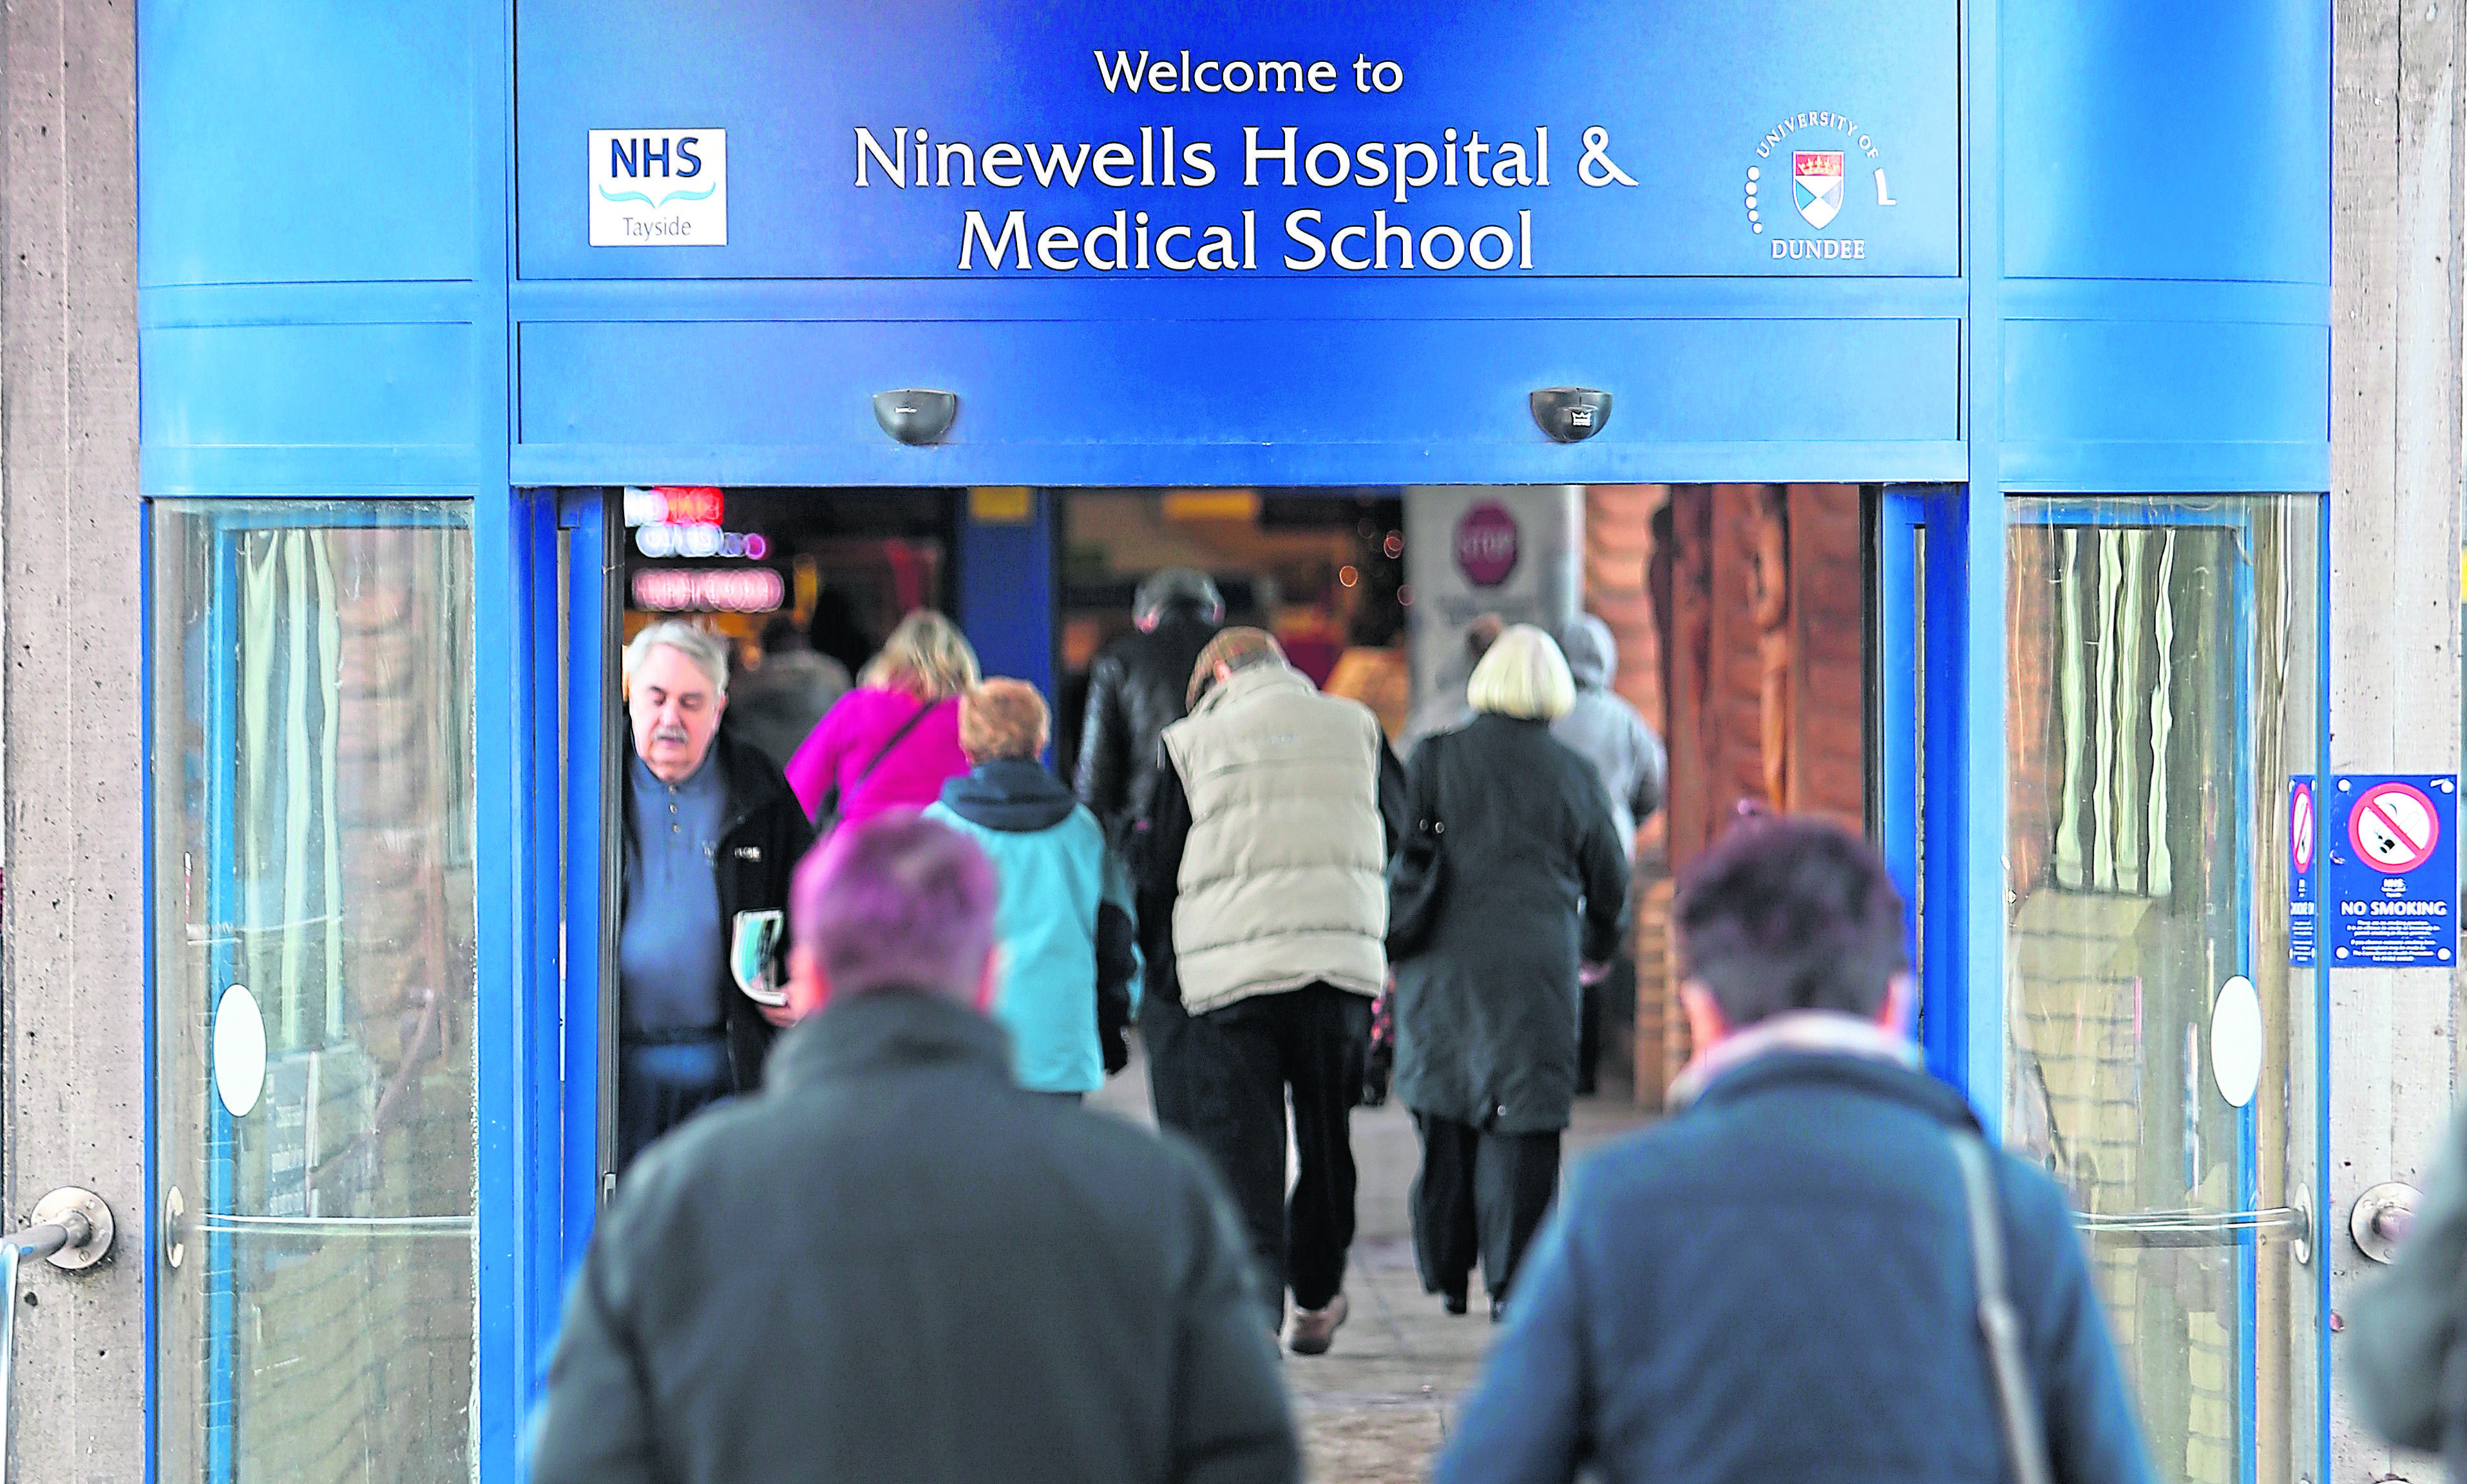 General view of the exterior entrance to Ninewells Hospital.